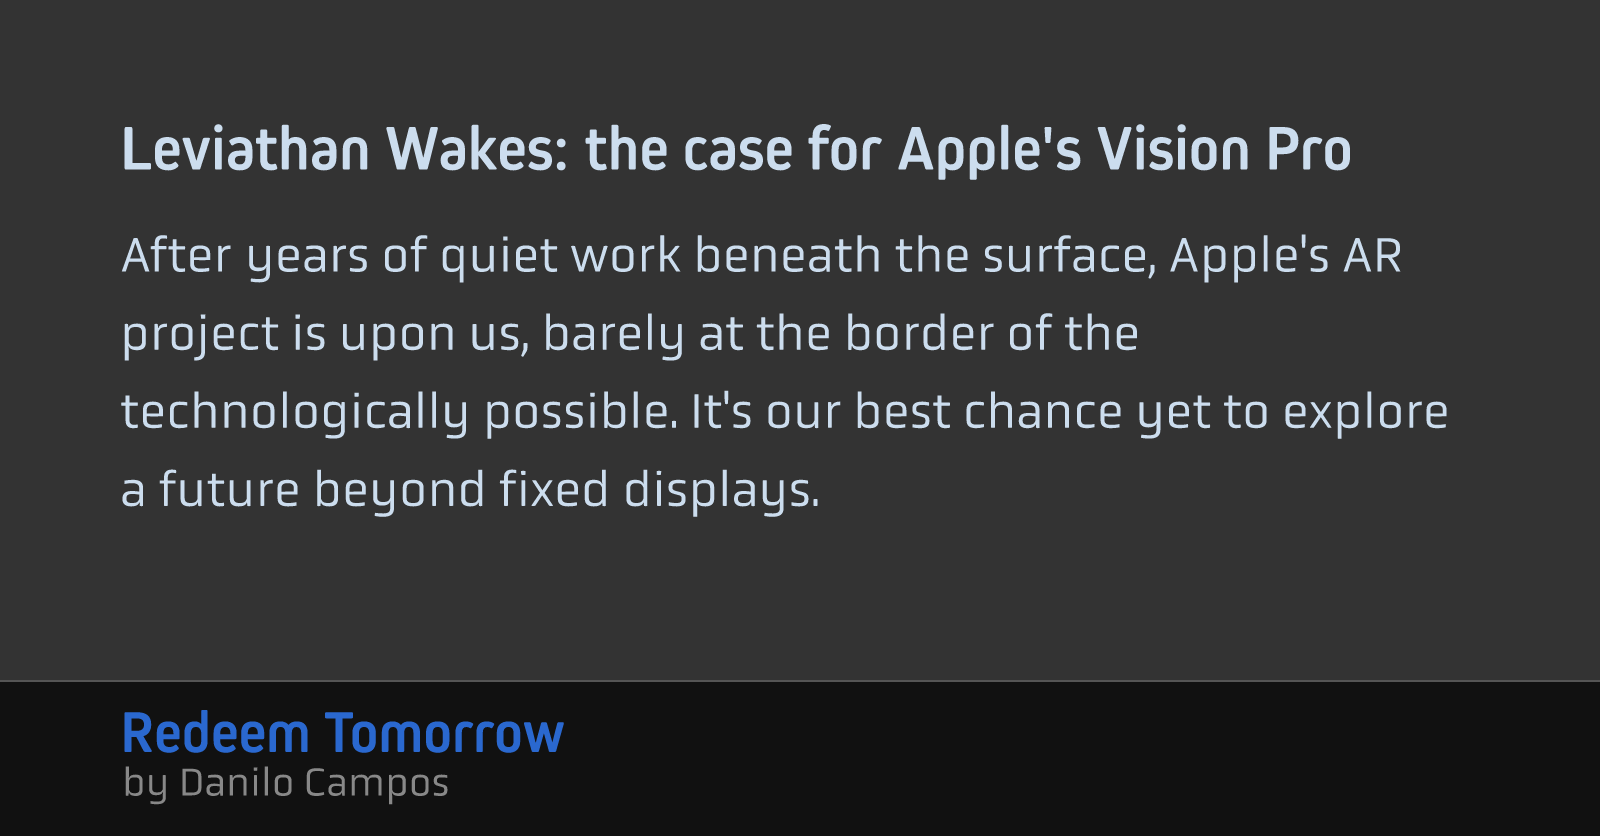 Leviathan Wakes: the case for Apple's Vision Pro